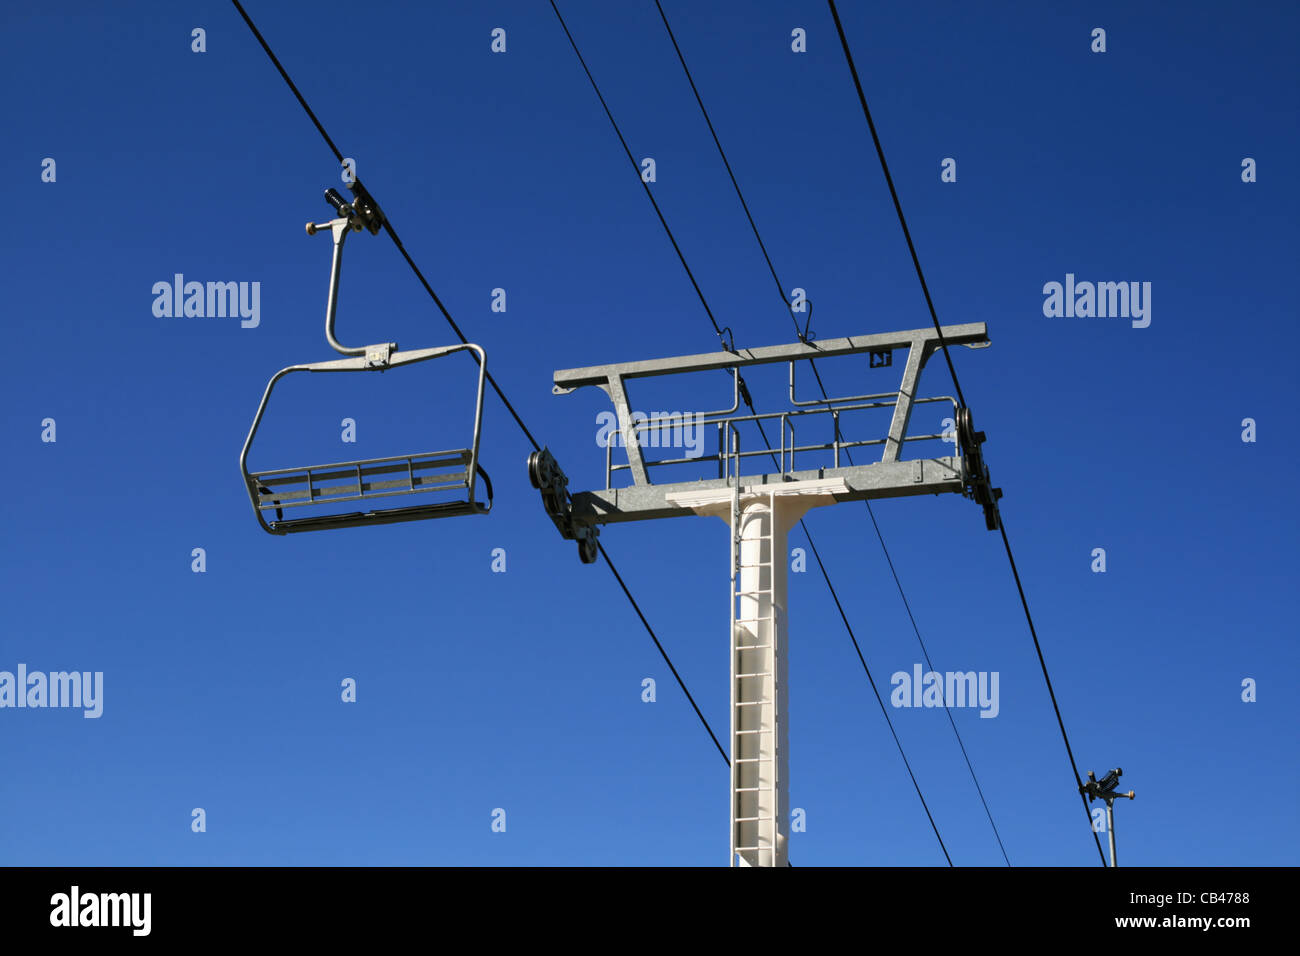 empty ski lift and tower with a blue sky background Stock Photo